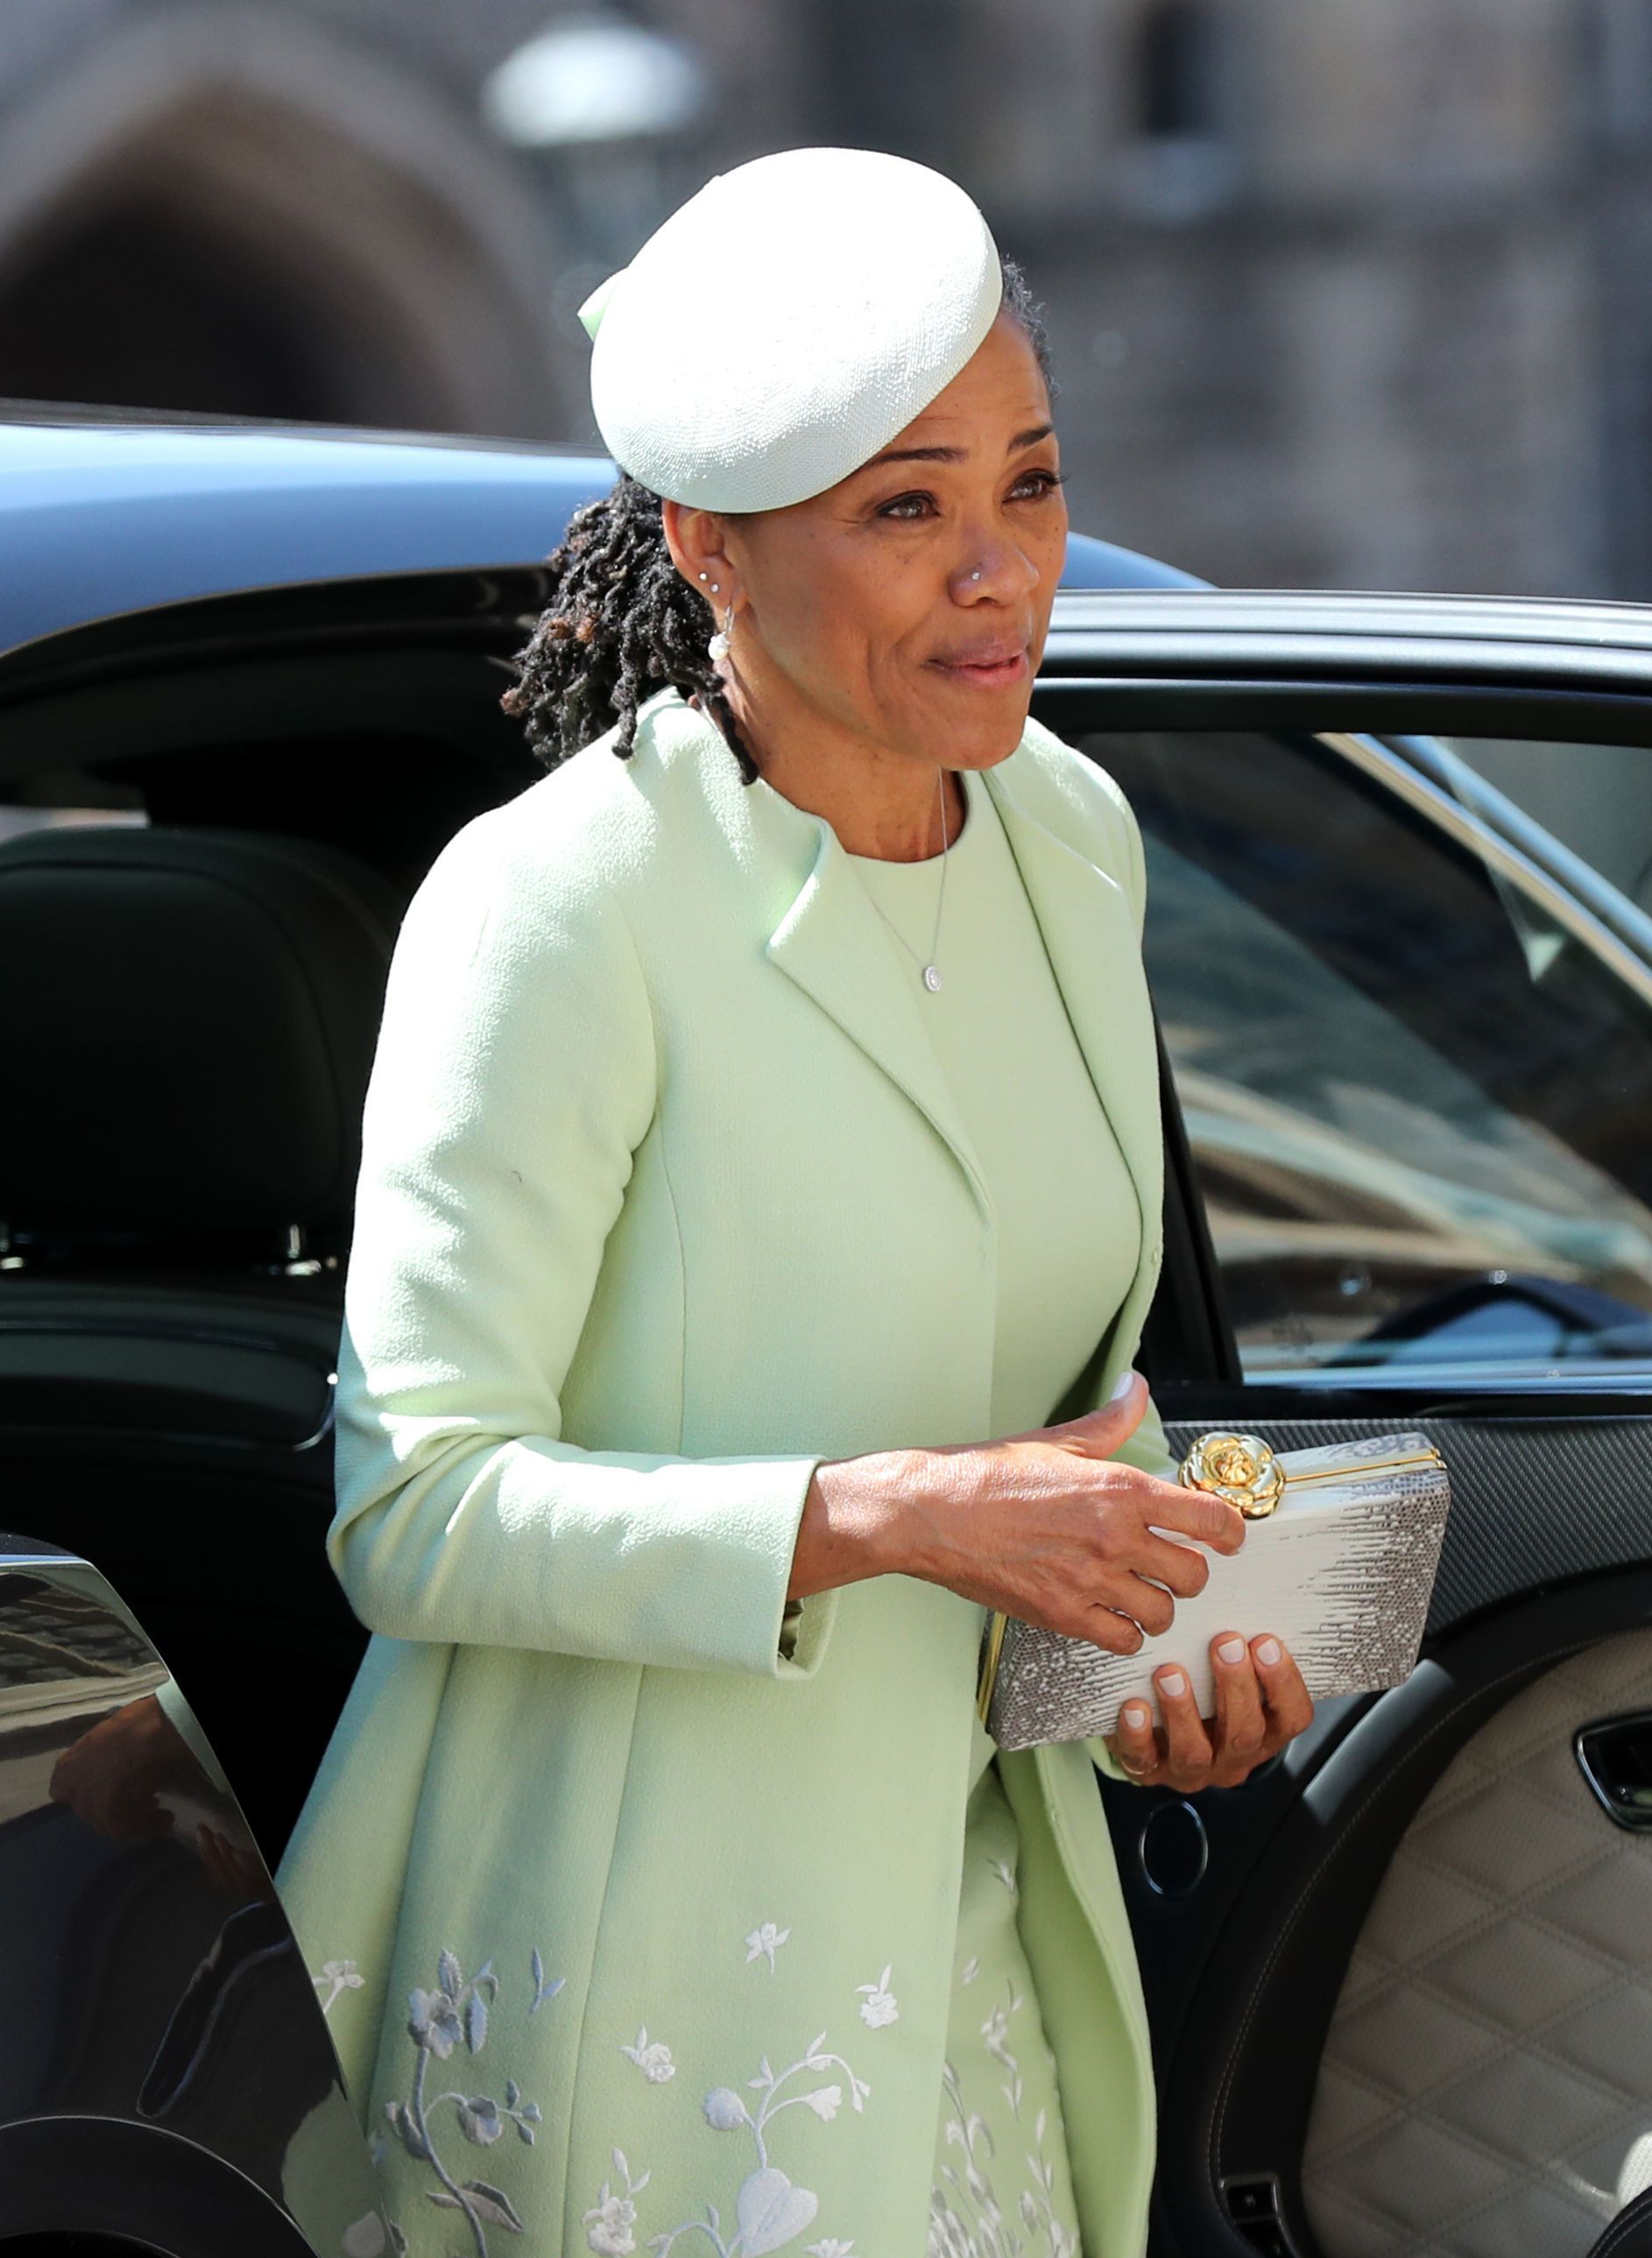 Doria Ragland arrives at St George's Chapel at Windsor Castle before the wedding of Prince Harry to Meghan Markle on May 19, 2018 | Getty Images